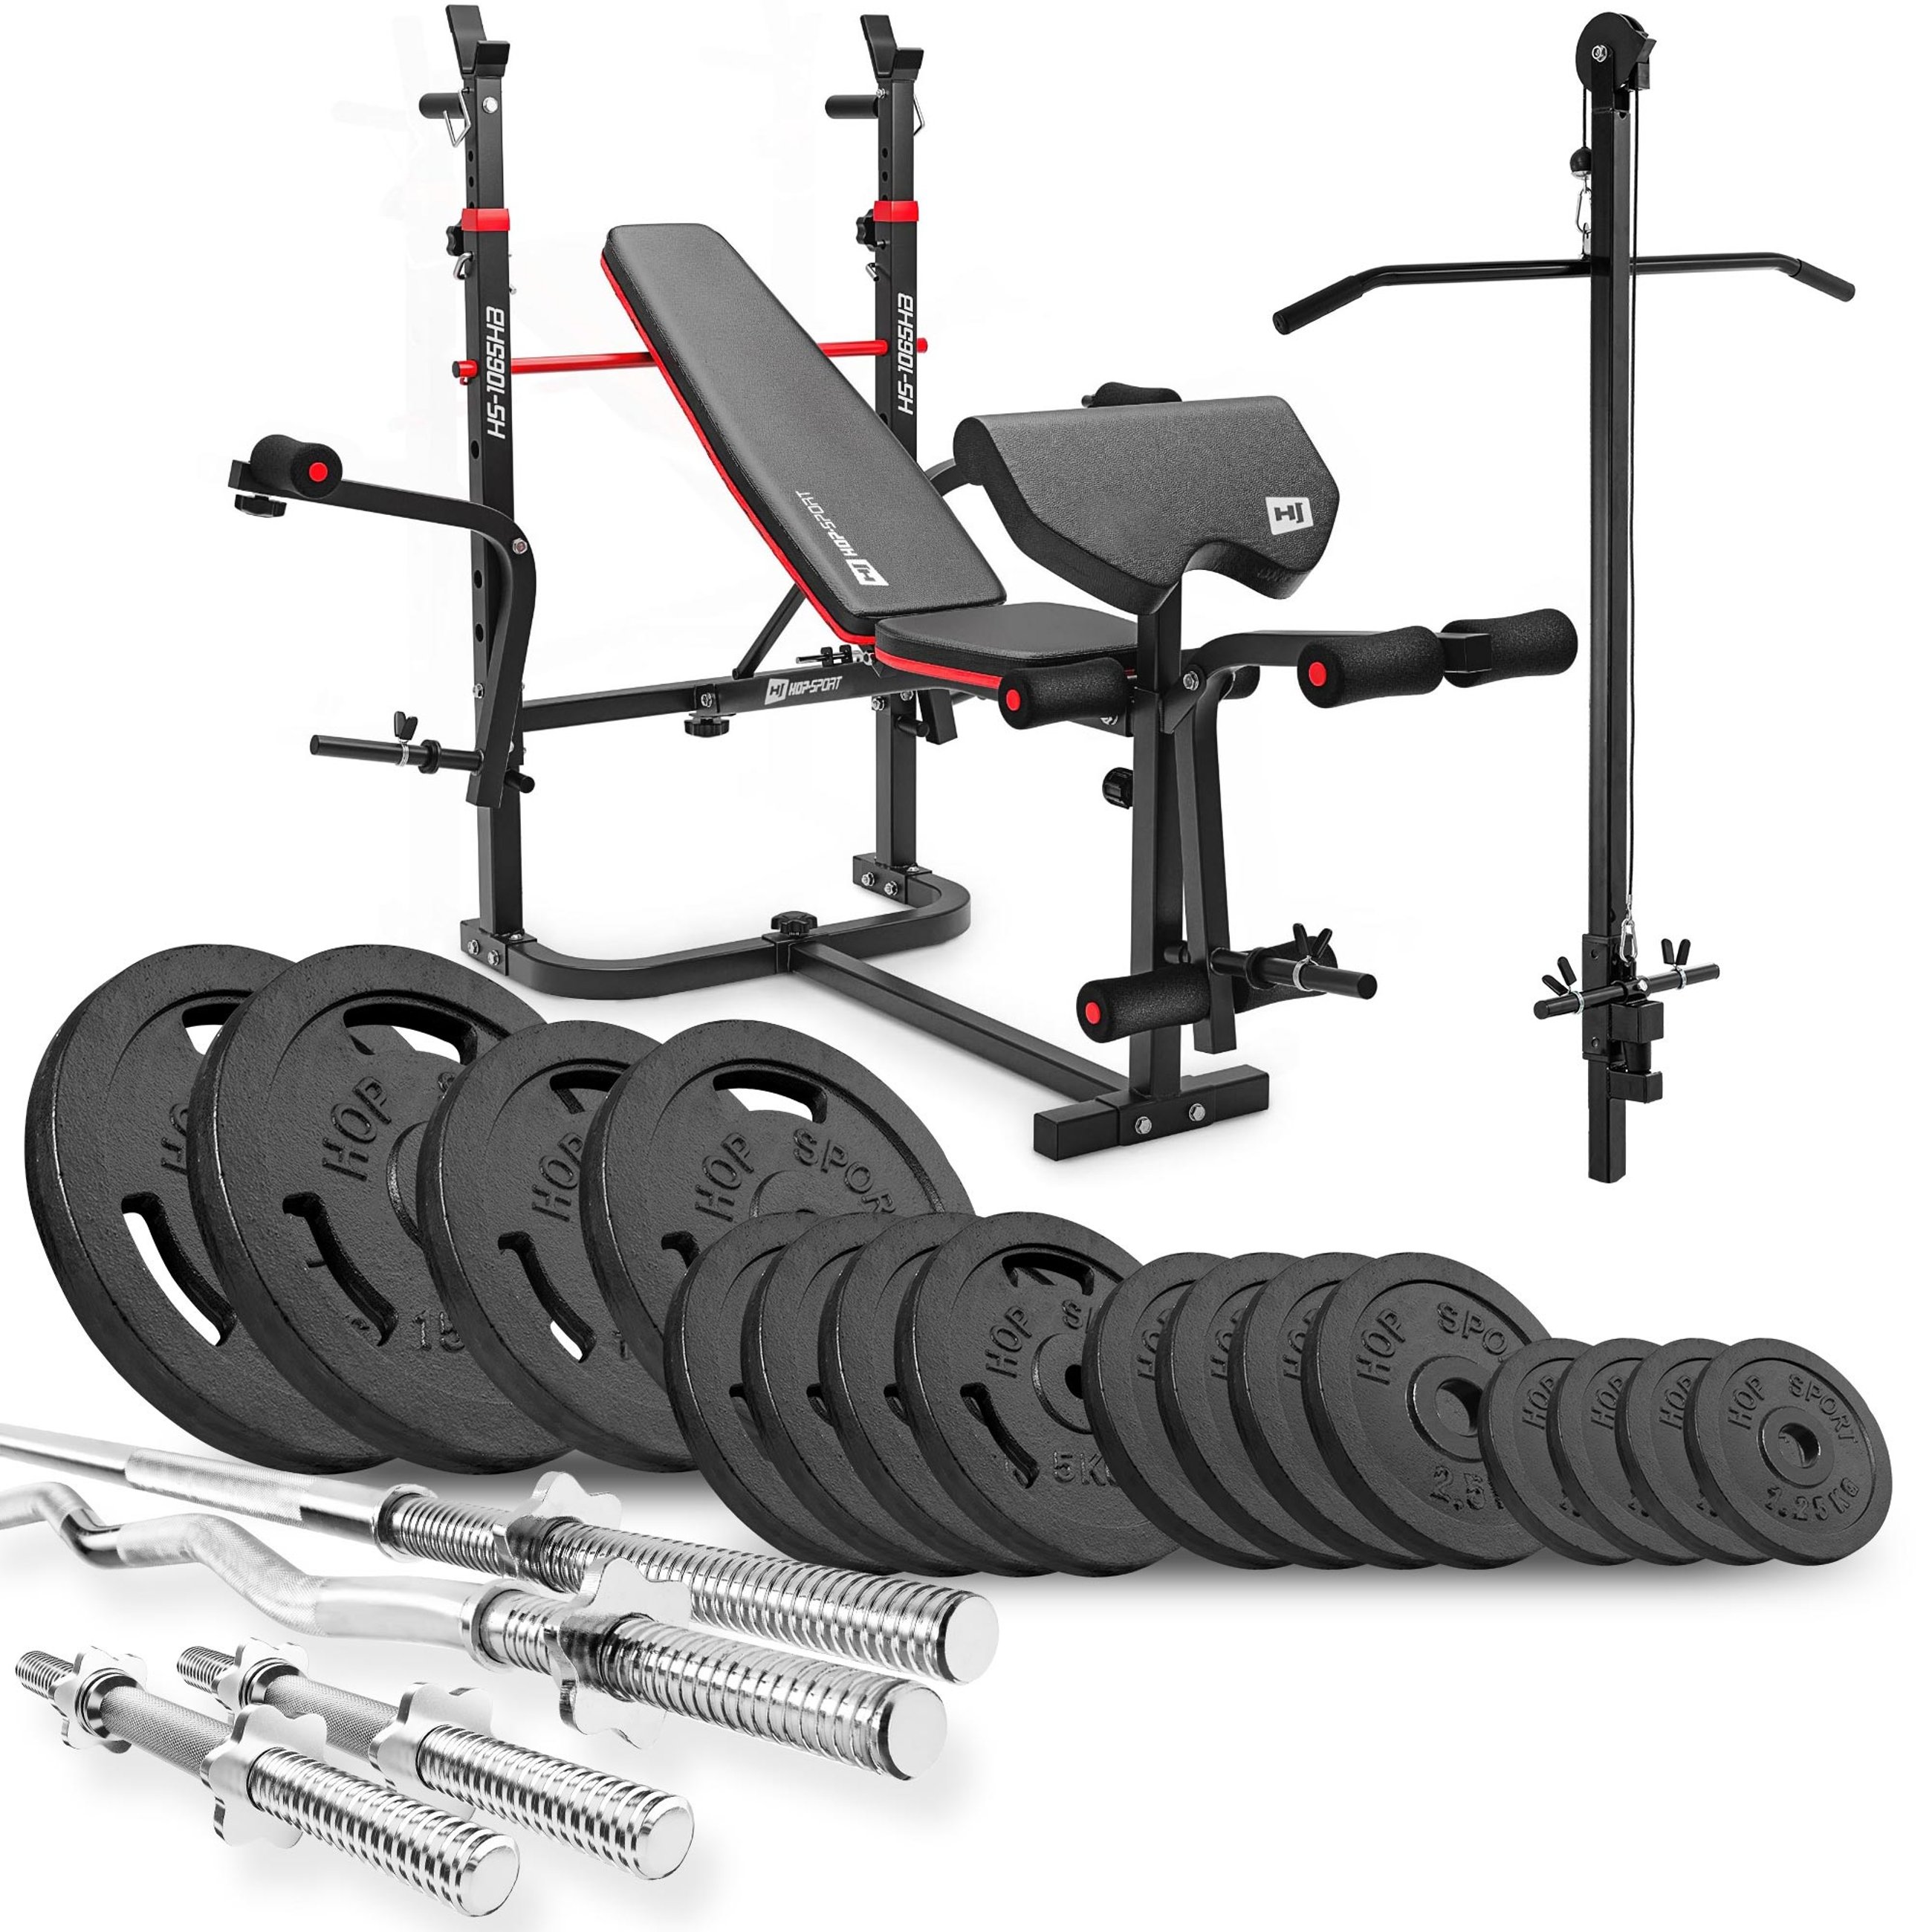 Strong 106 kg Cast Iron Barbell Set with HS-1065 Weight Bench